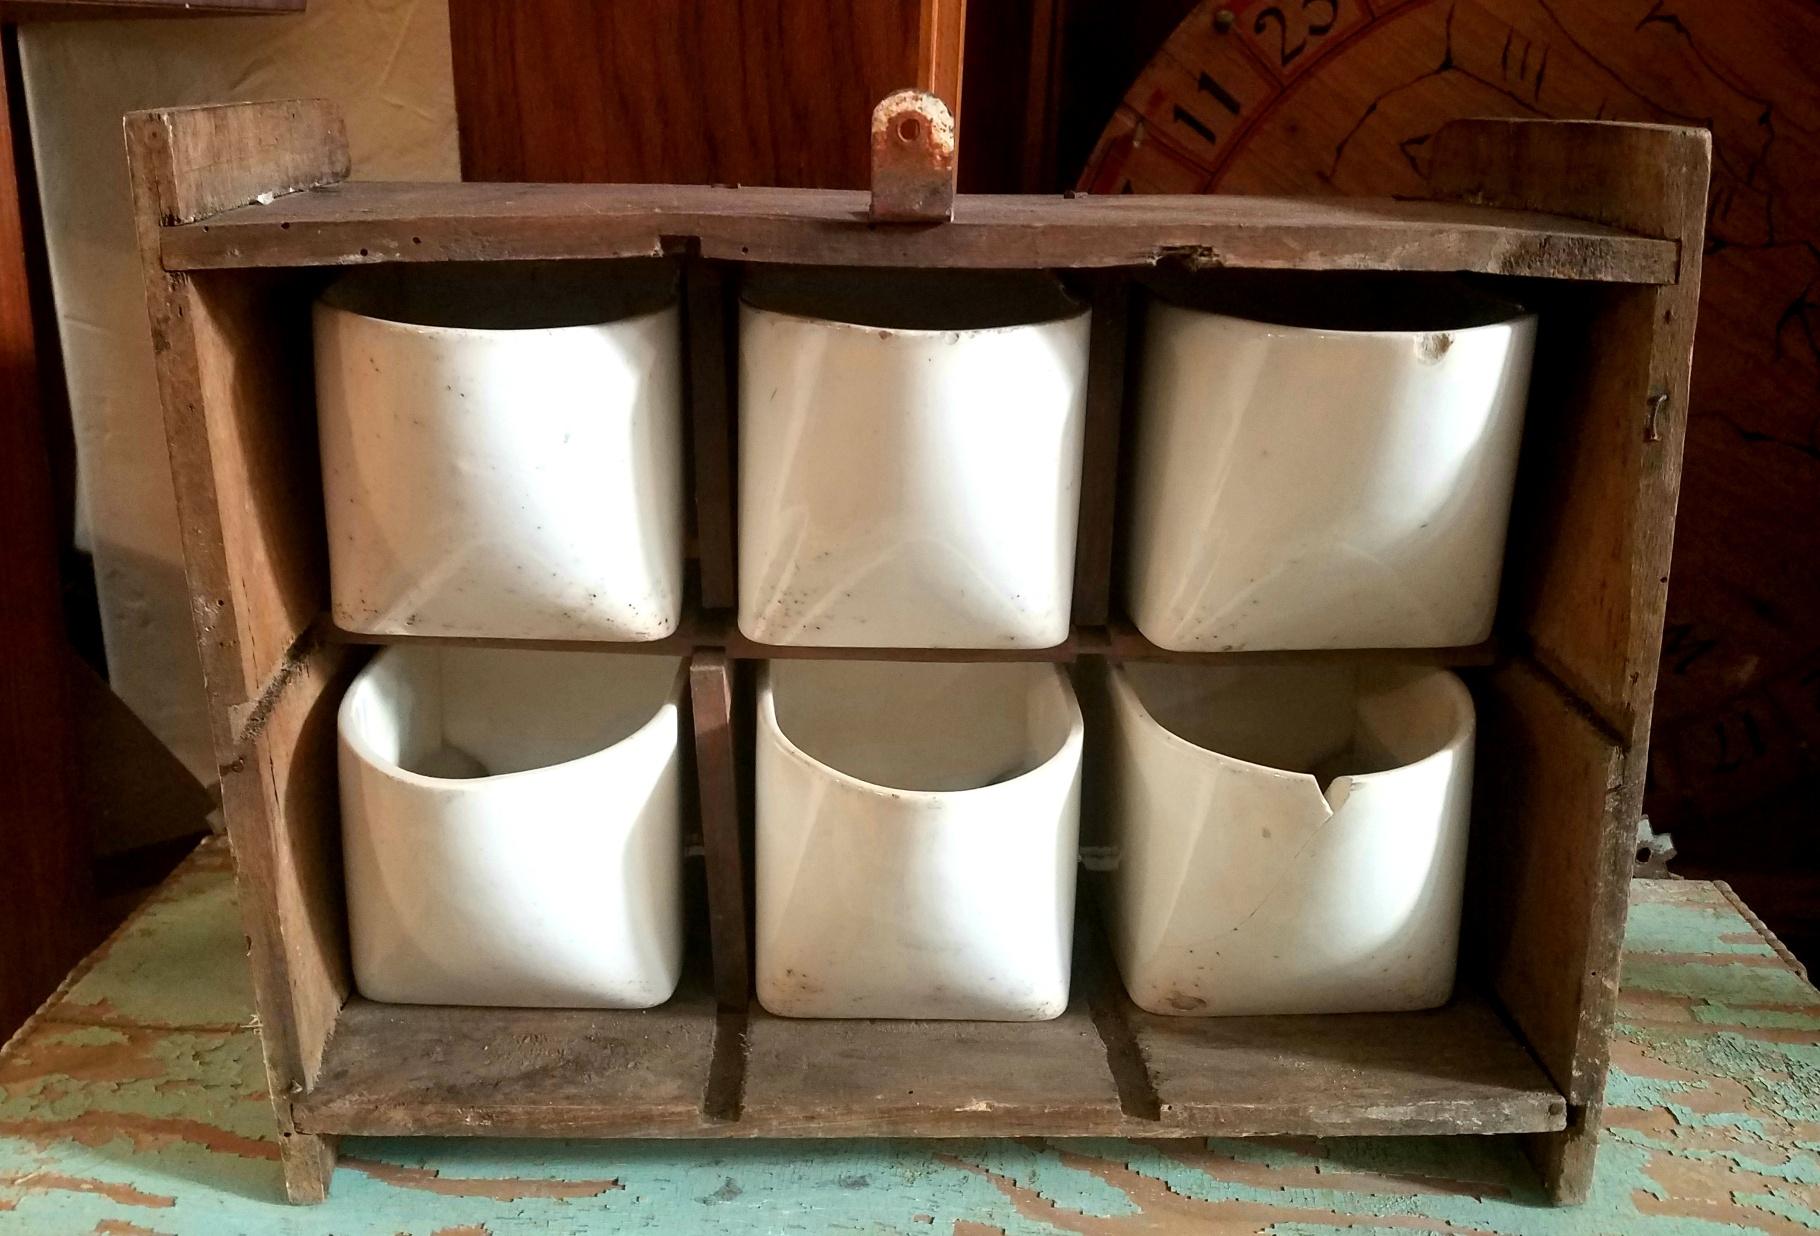 1900s ceramic wall spice rack hand painted and glazed ceramic containers. Original condition. Wood base is hand made.